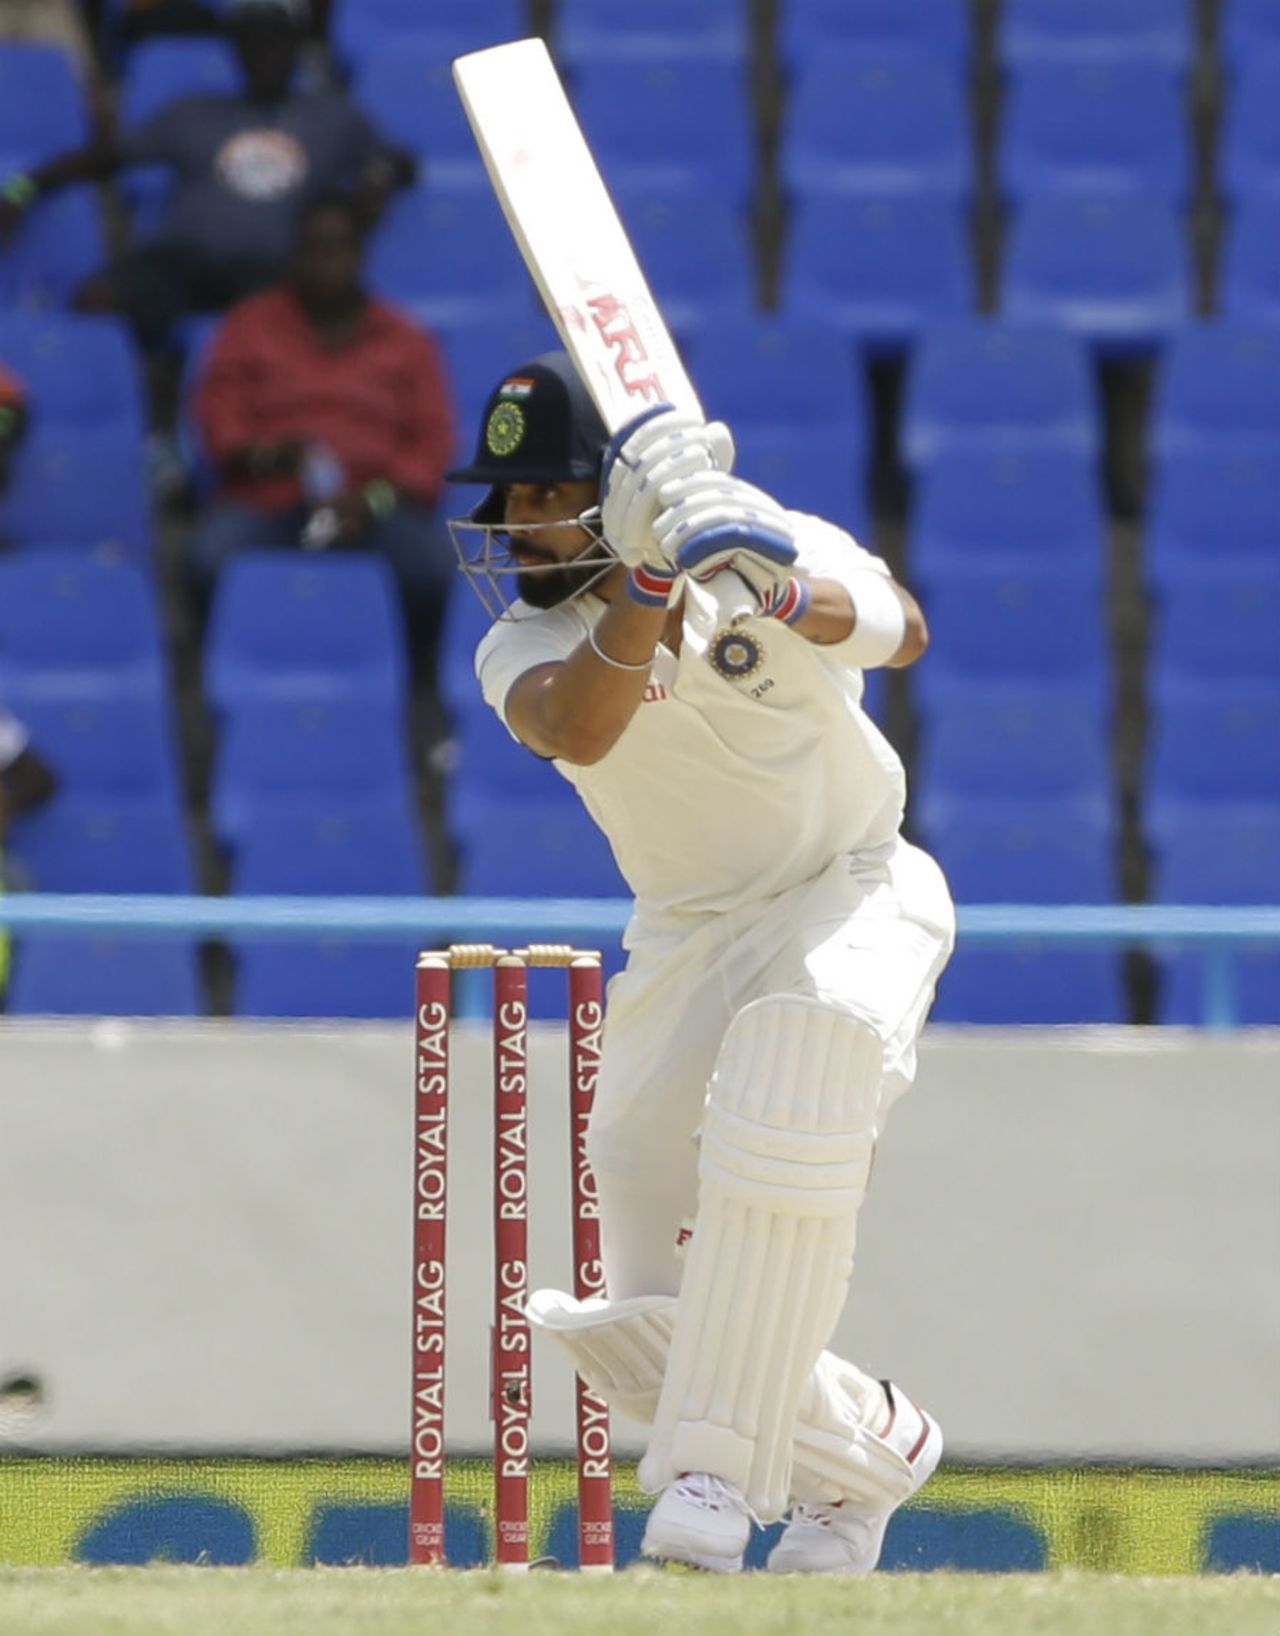 Virat Kohli eases into a drive, West Indies v India, 1st Test, Antigua, 1st day, July 21, 2016